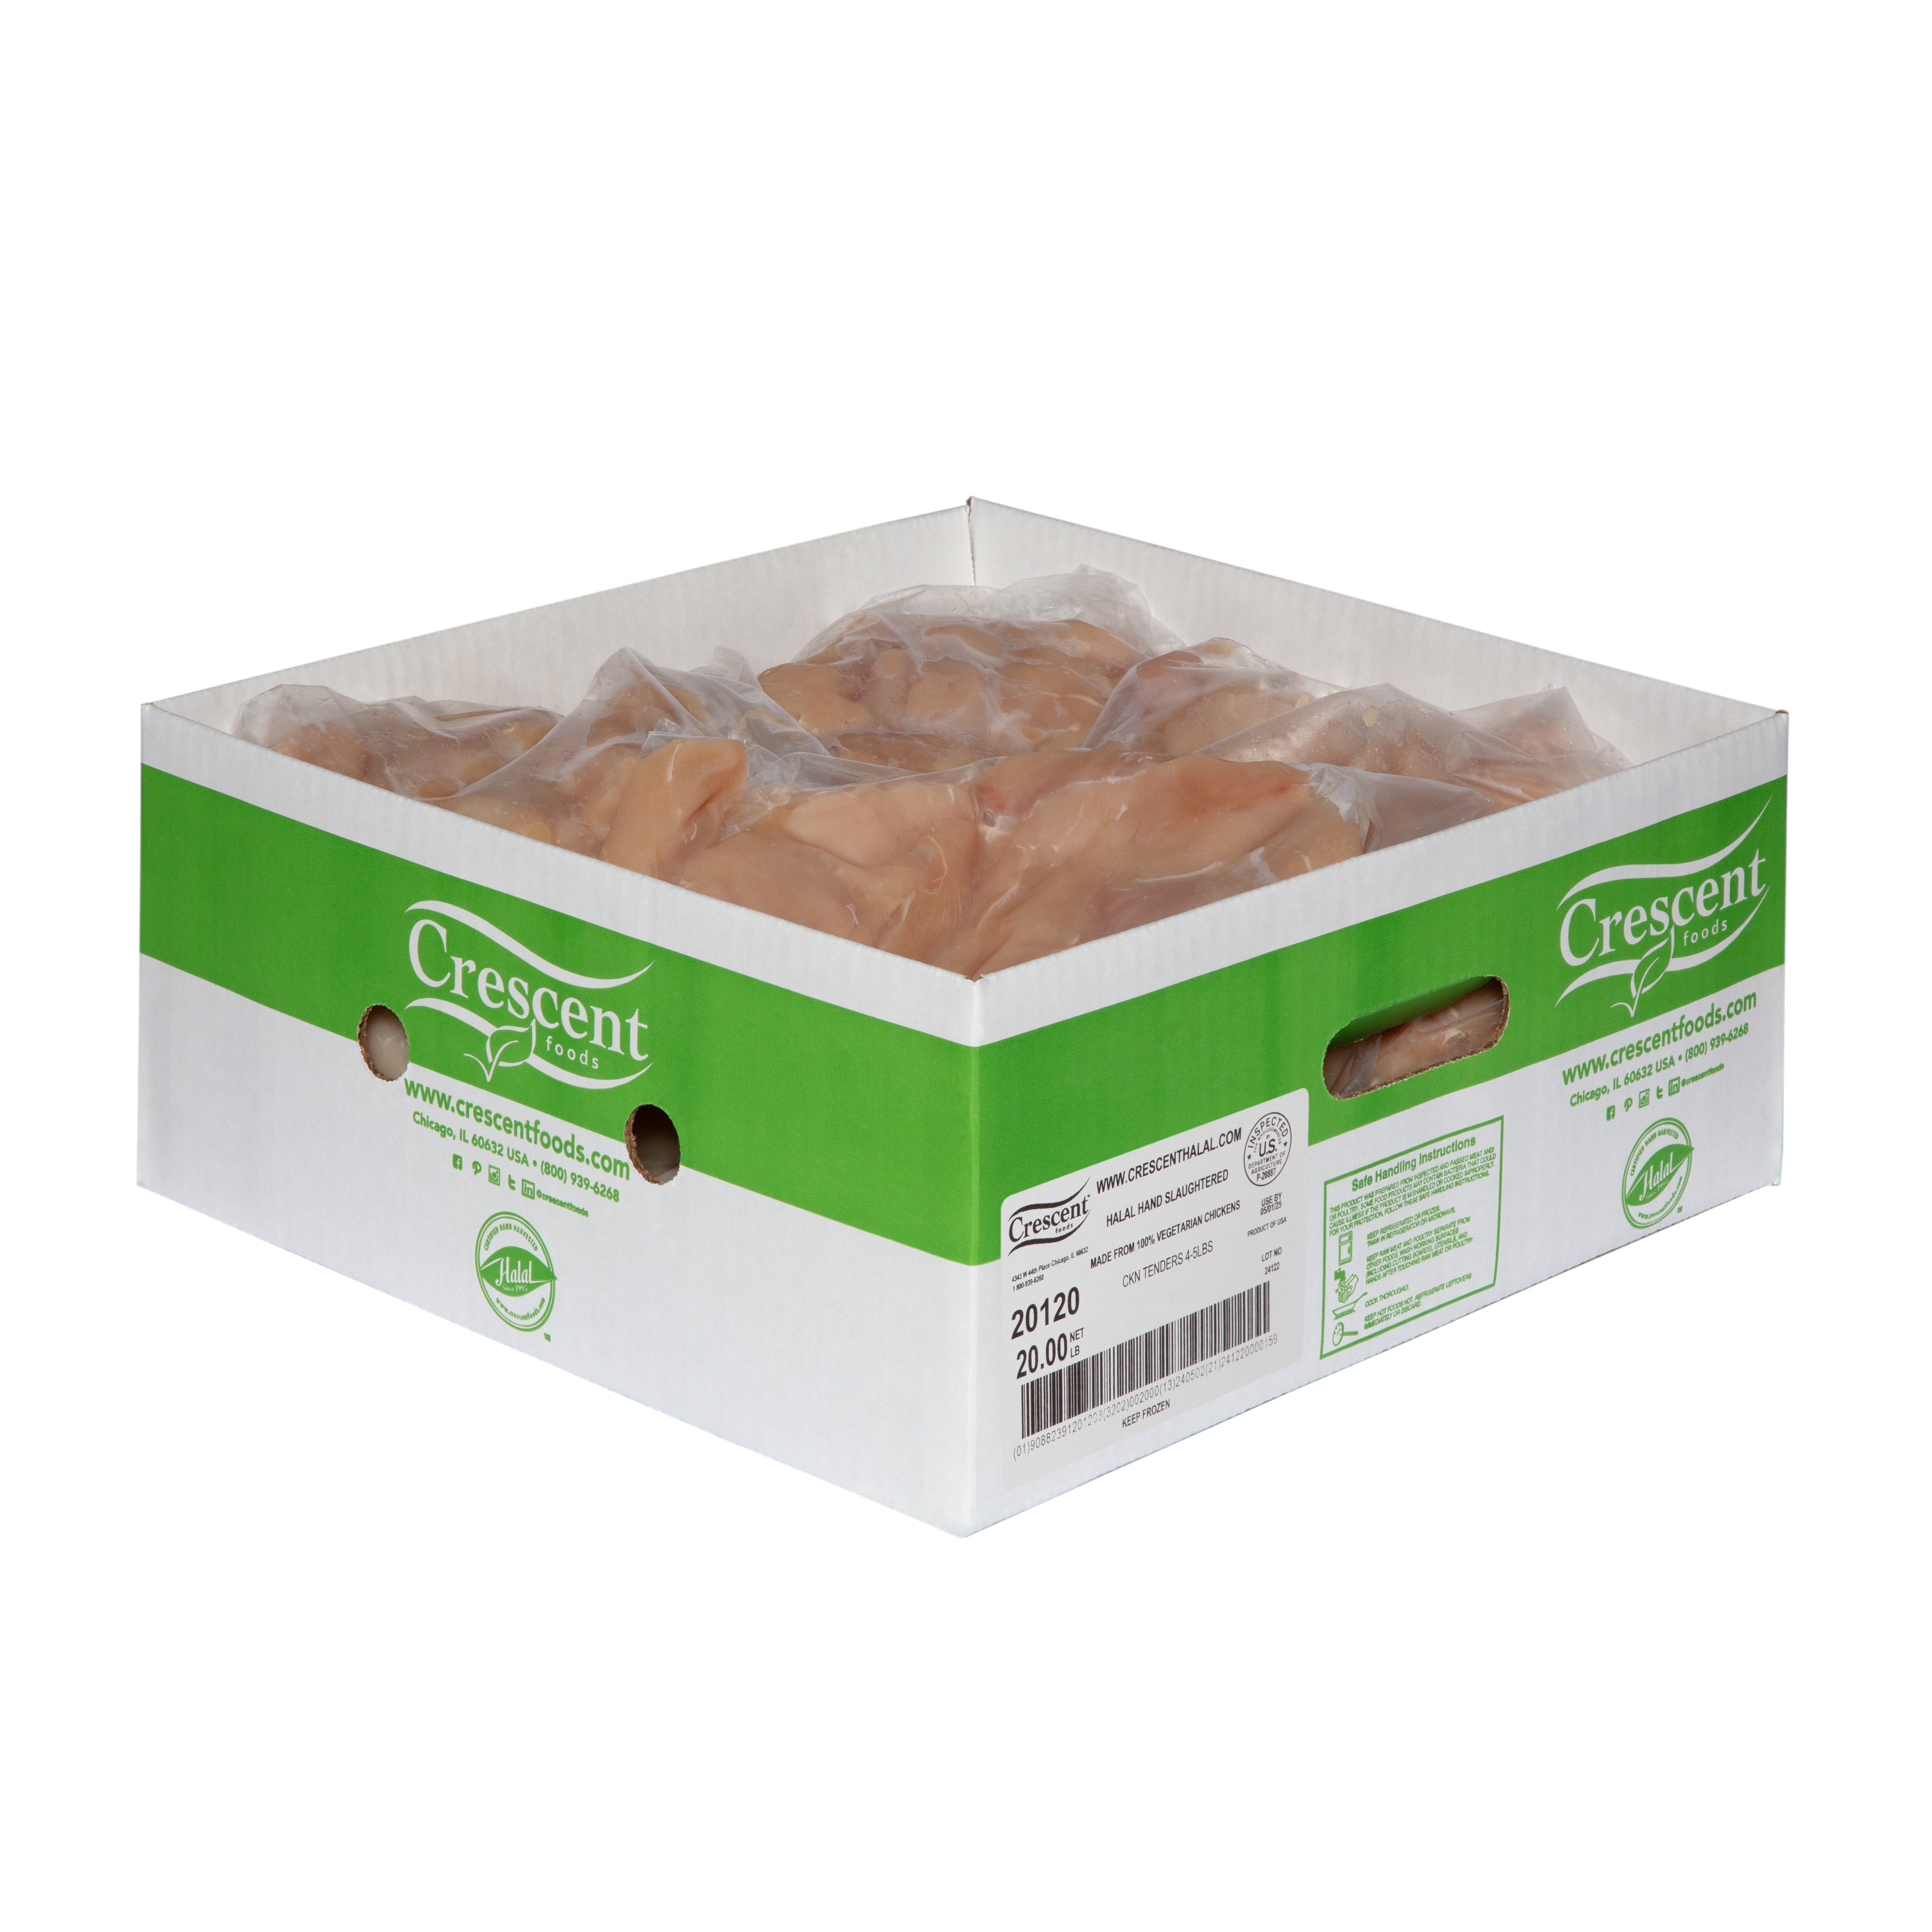 20 Pound Case - All Natural Halal Hand-Cut Chicken Tenders